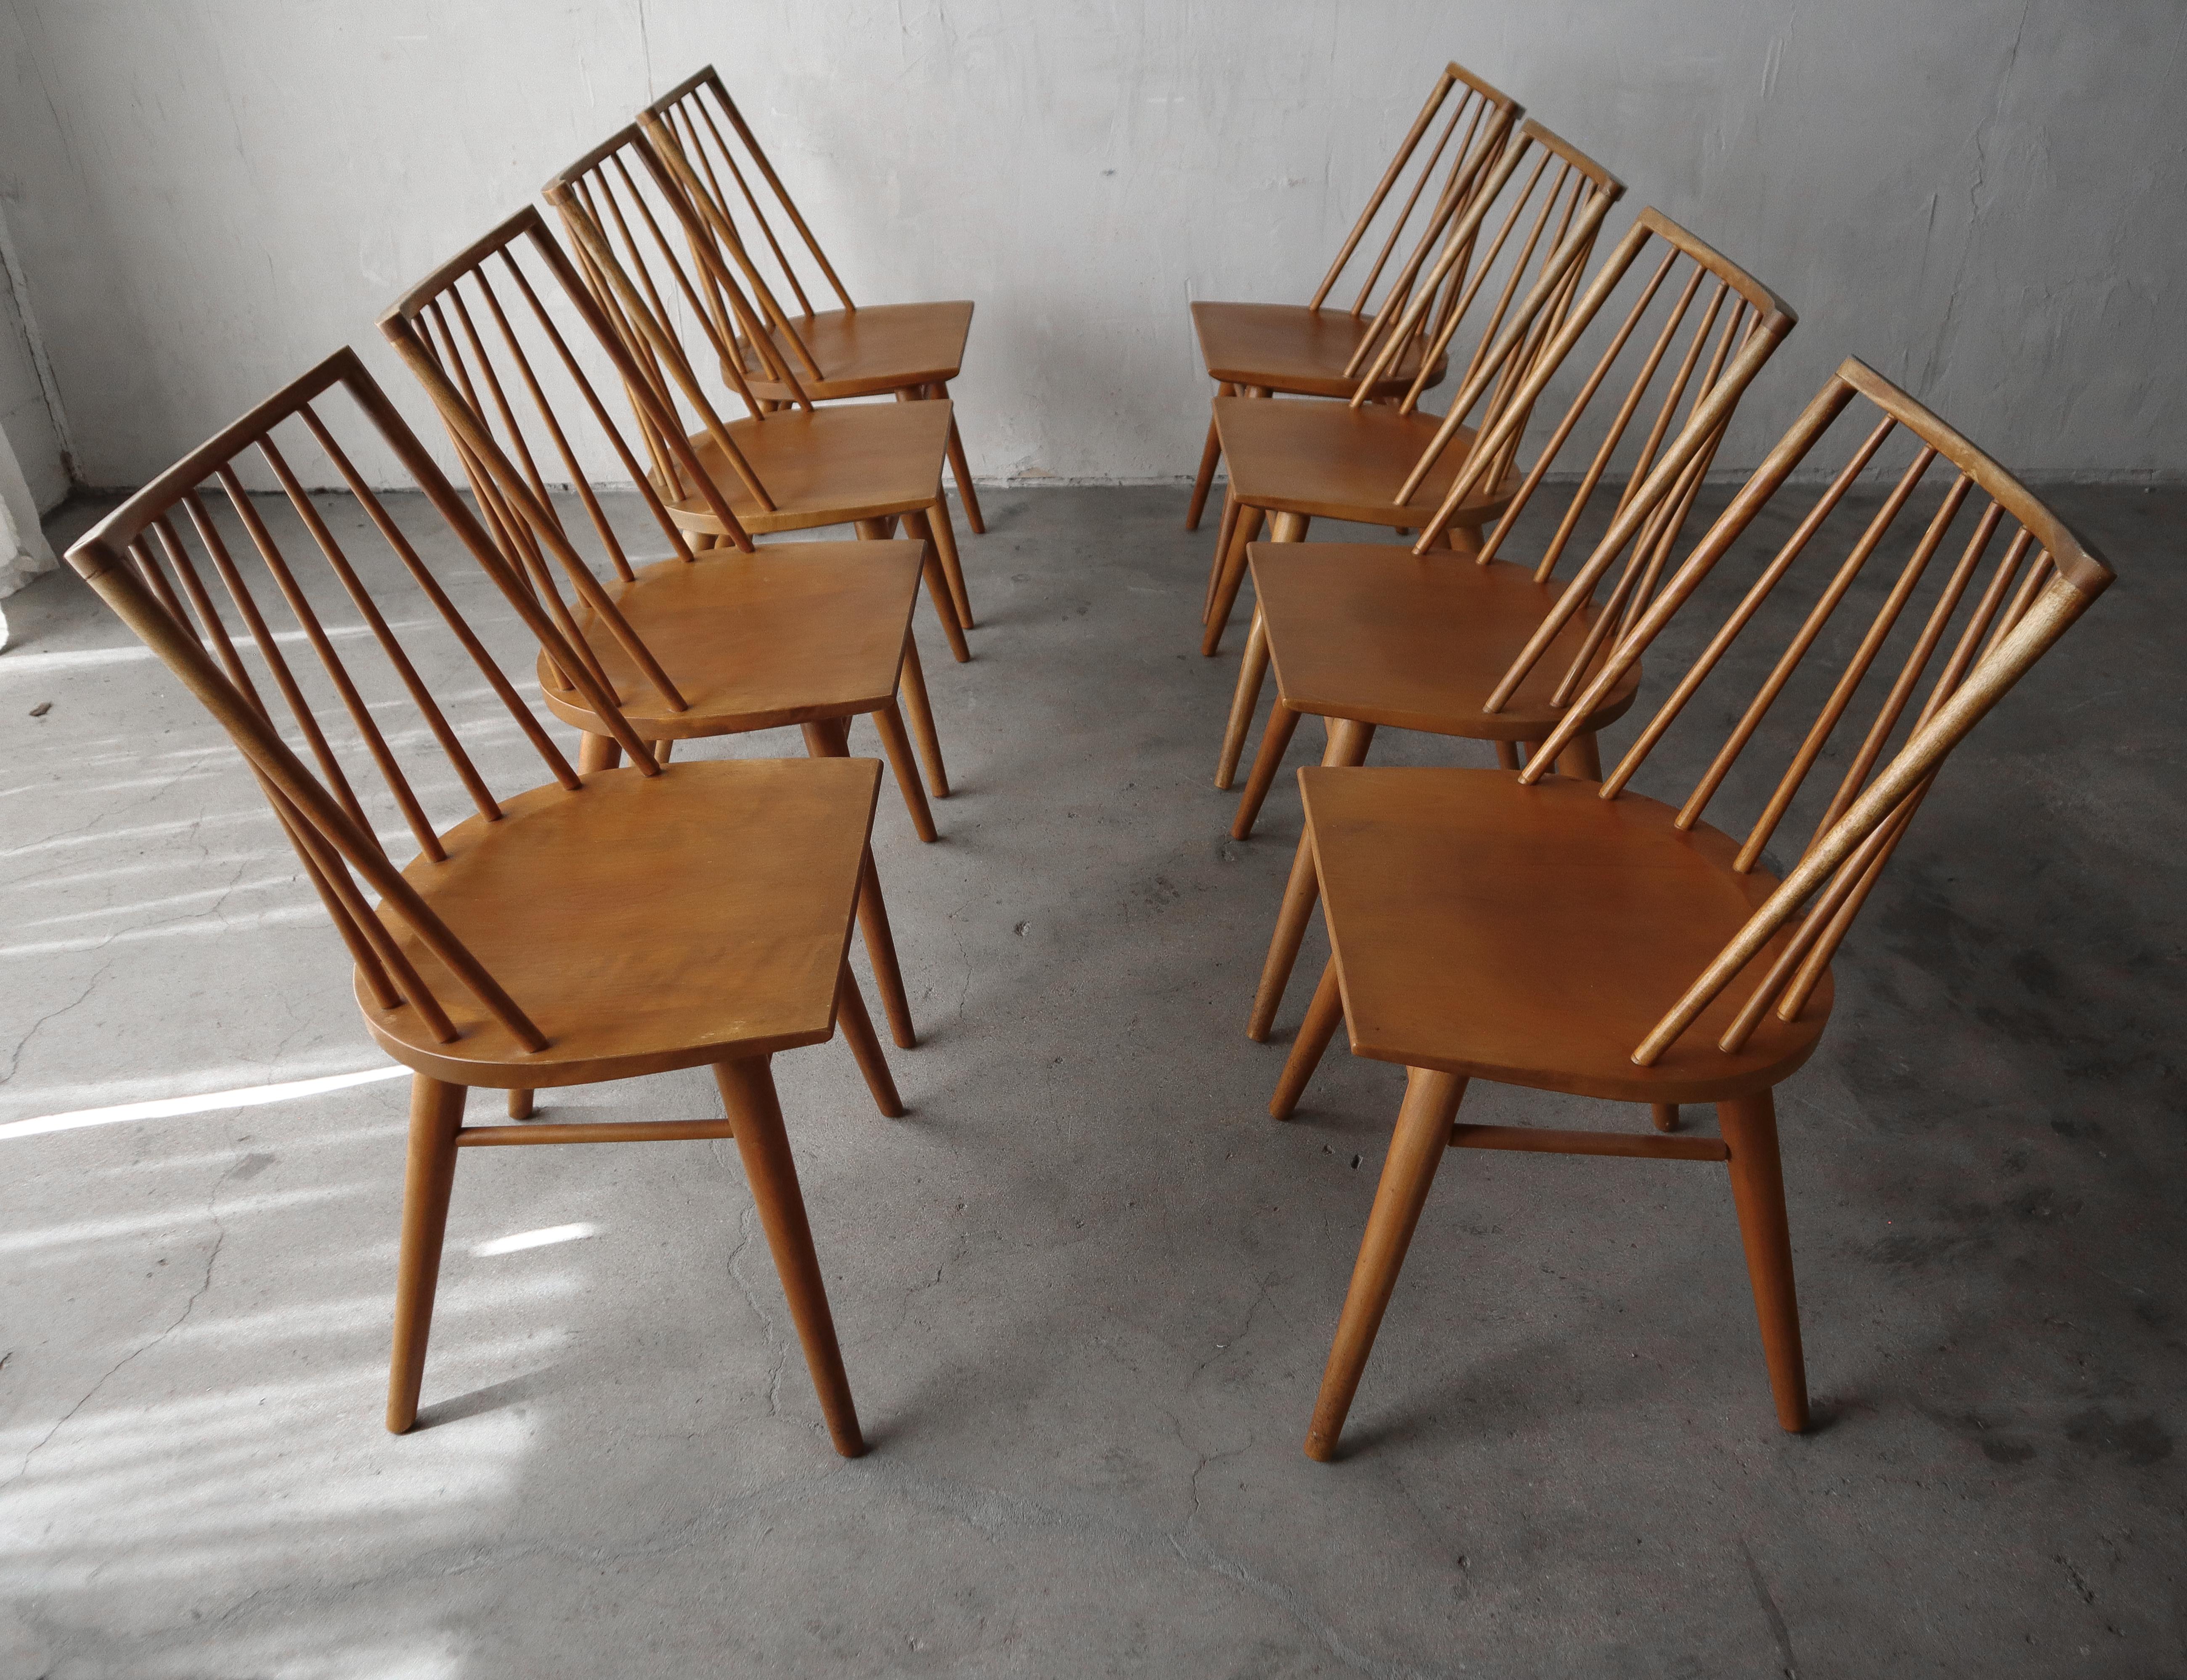 Beautiful set of 8 midcentury spindle back dining chairs by Conant Ball. These chairs have a very clean, minimalist design, their solid rock maple construction makes them both stylish and durable.

Chairs are in great vintage condition, they do show